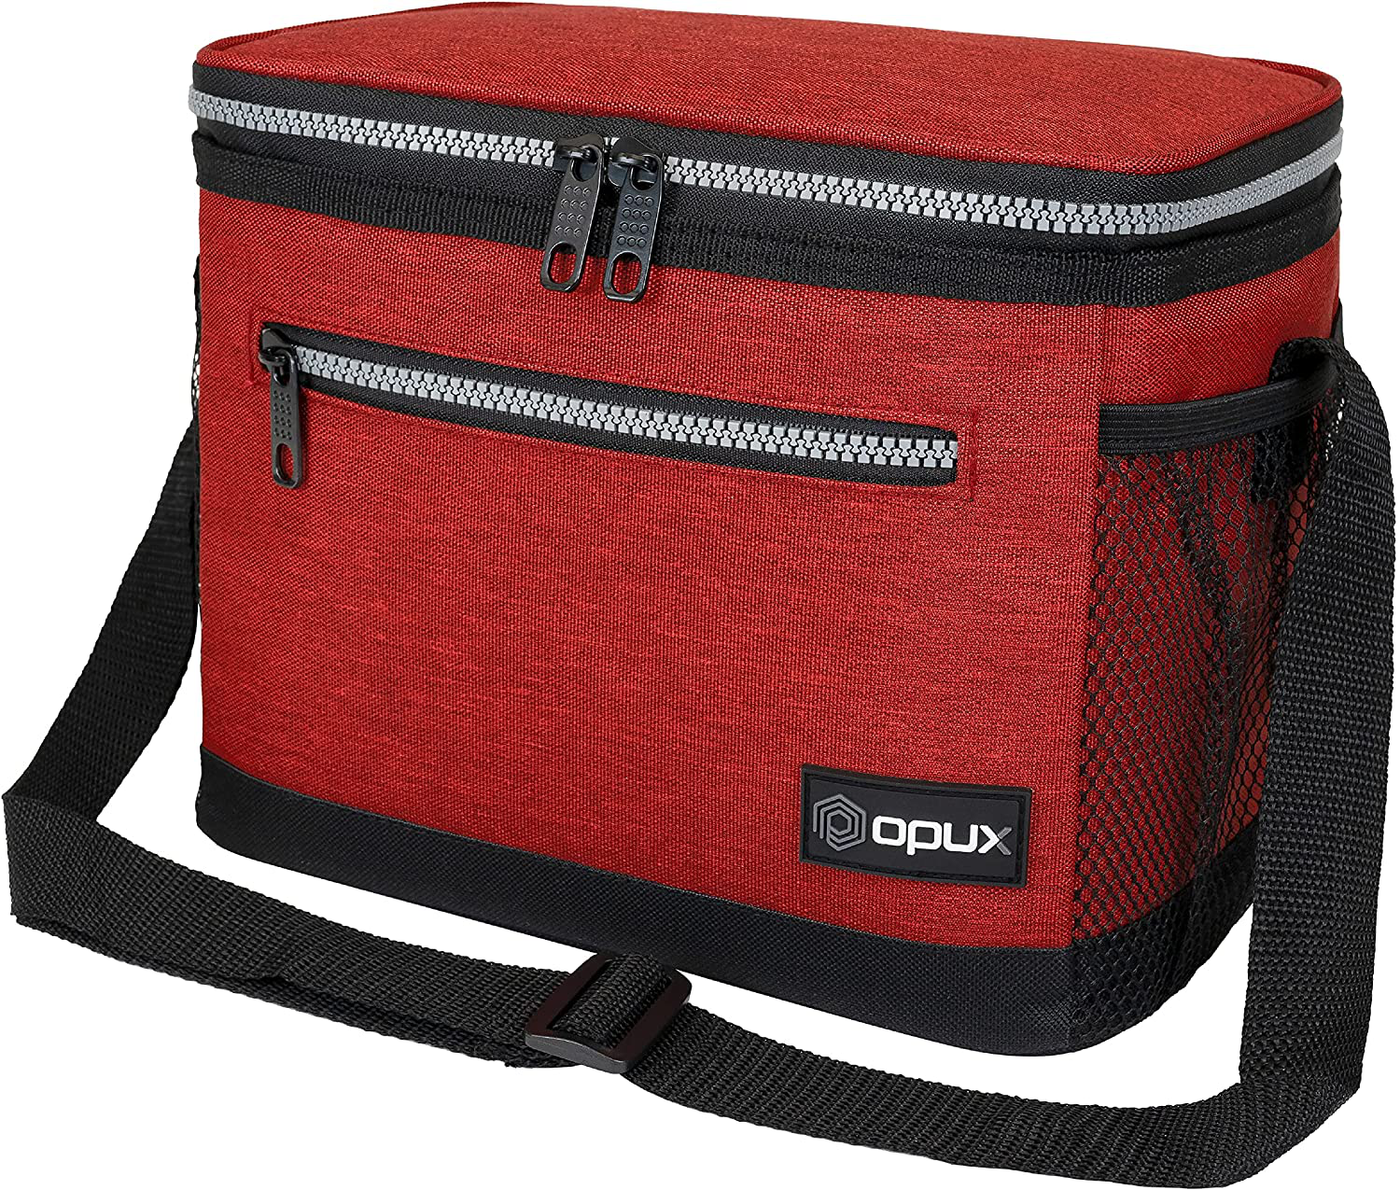 OPUX Insulated Lunch Box for Men Women, Leakproof Thermal Lunch Bag for Work, Reusable Lunch Cooler Tote, Soft School Lunch Pail for Kids with Shoulder Strap, Pockets, 14 Cans, 8L, Heather Red